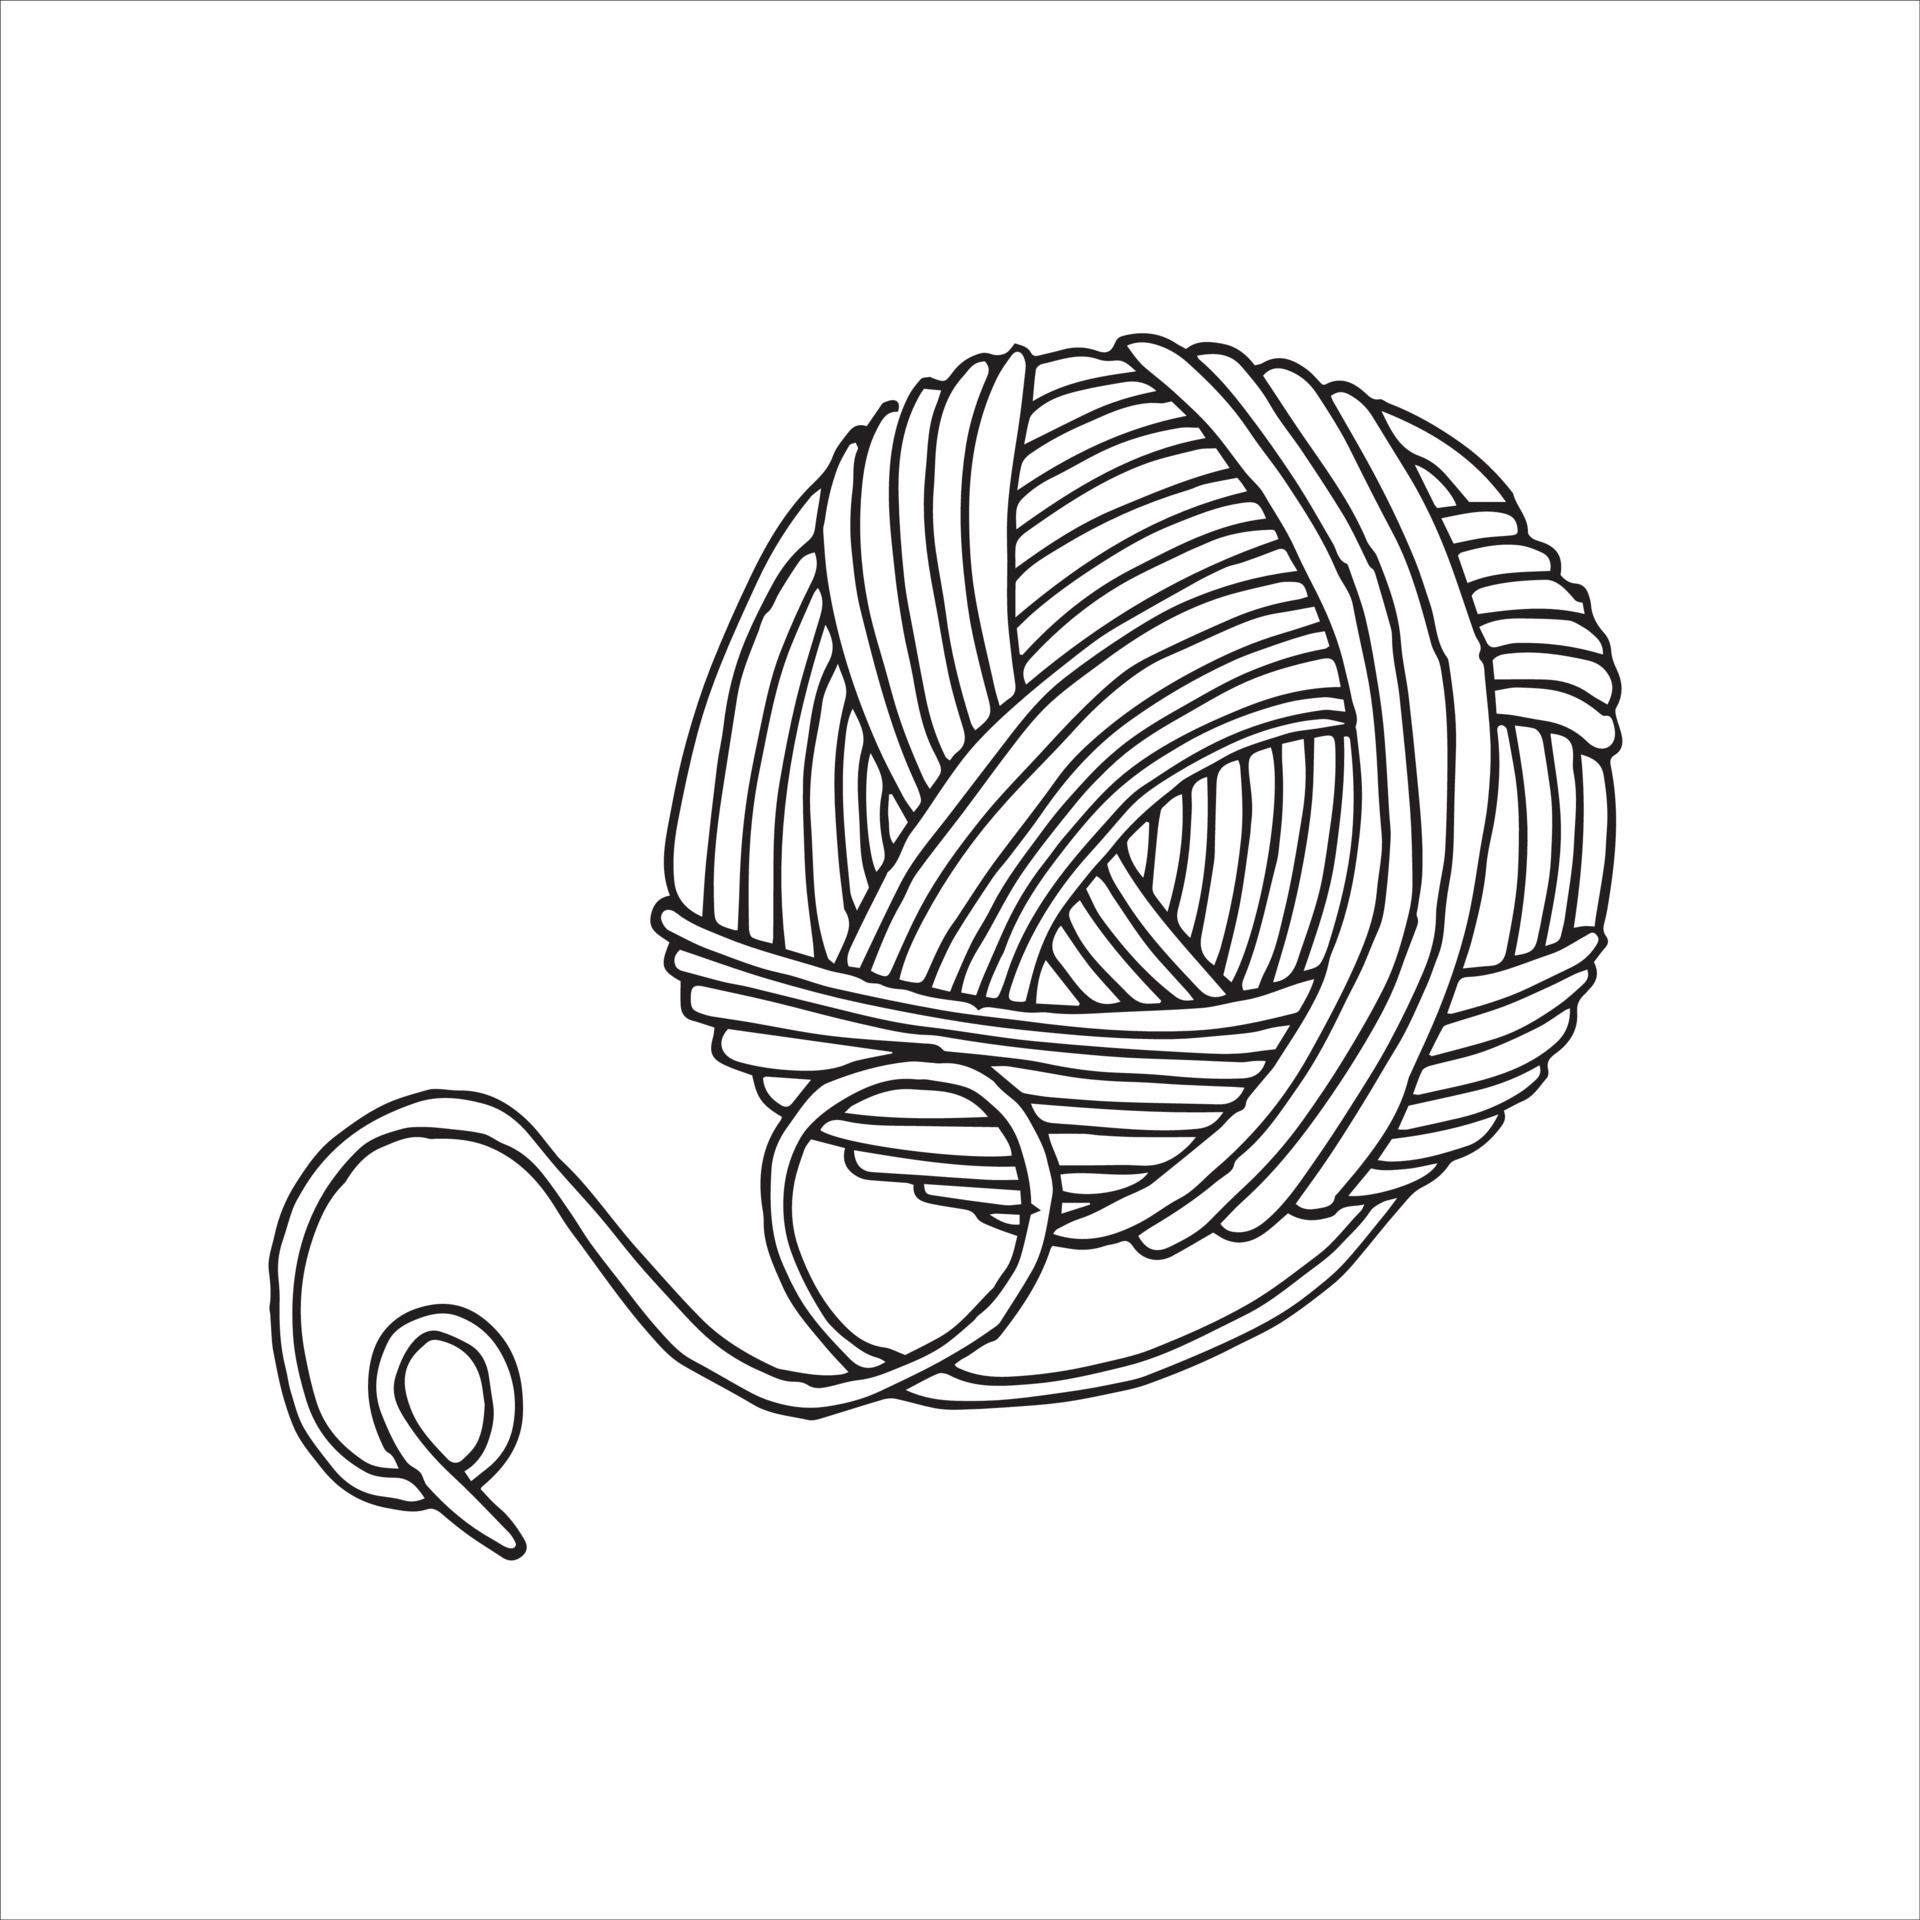 Knitting Yarn Needles Lineart Clip Art  Simple Drawing Of Woolpng  download transparent png image  Free clip art Knitting yarn Yarn art